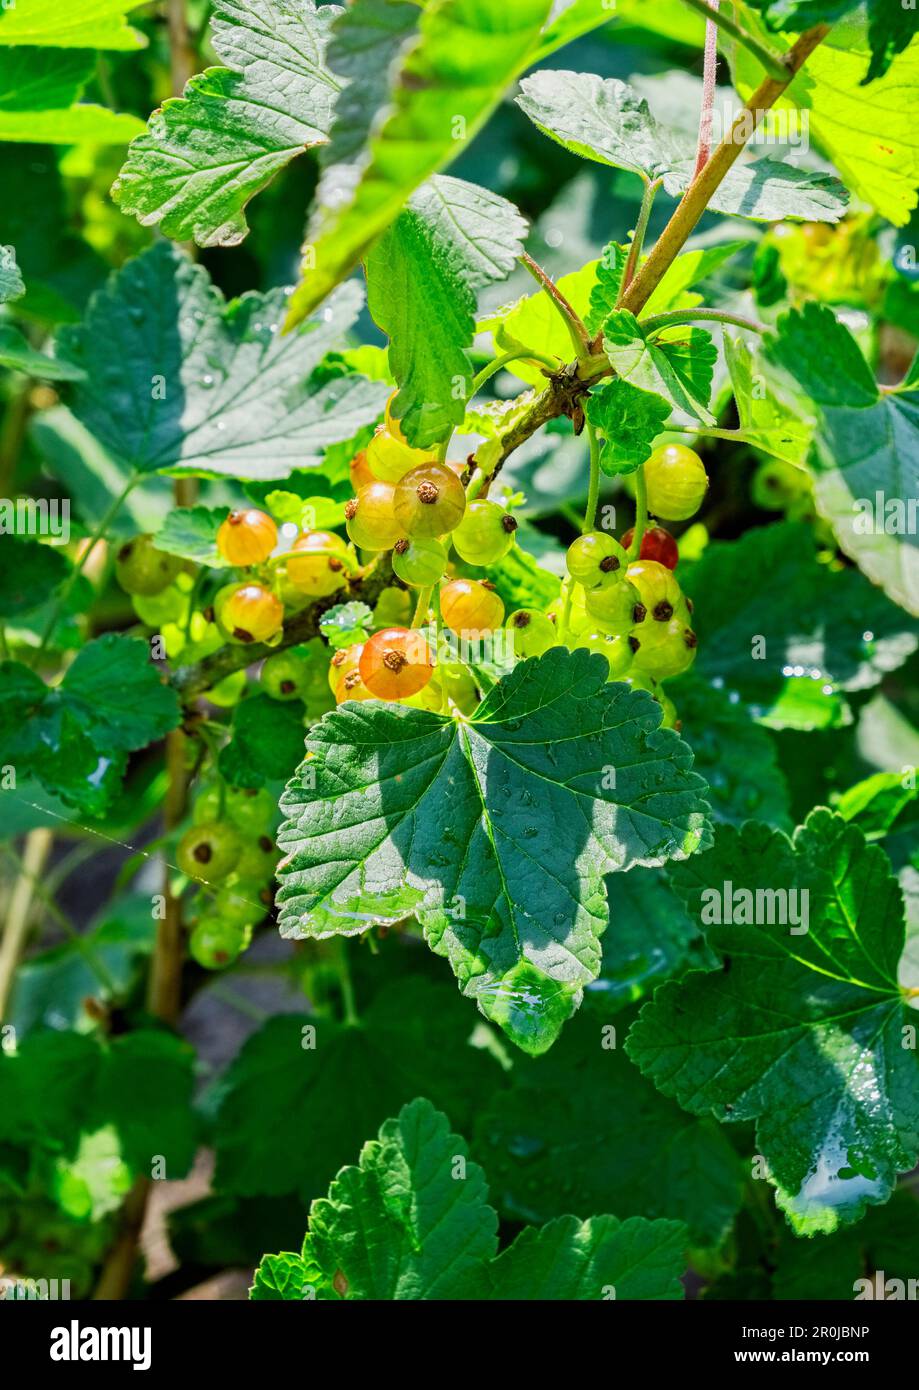 Johannisbeeren, AKA red currants, gooseberries, Ribes rubrum, are just beginning to ripen in early June. Stock Photo